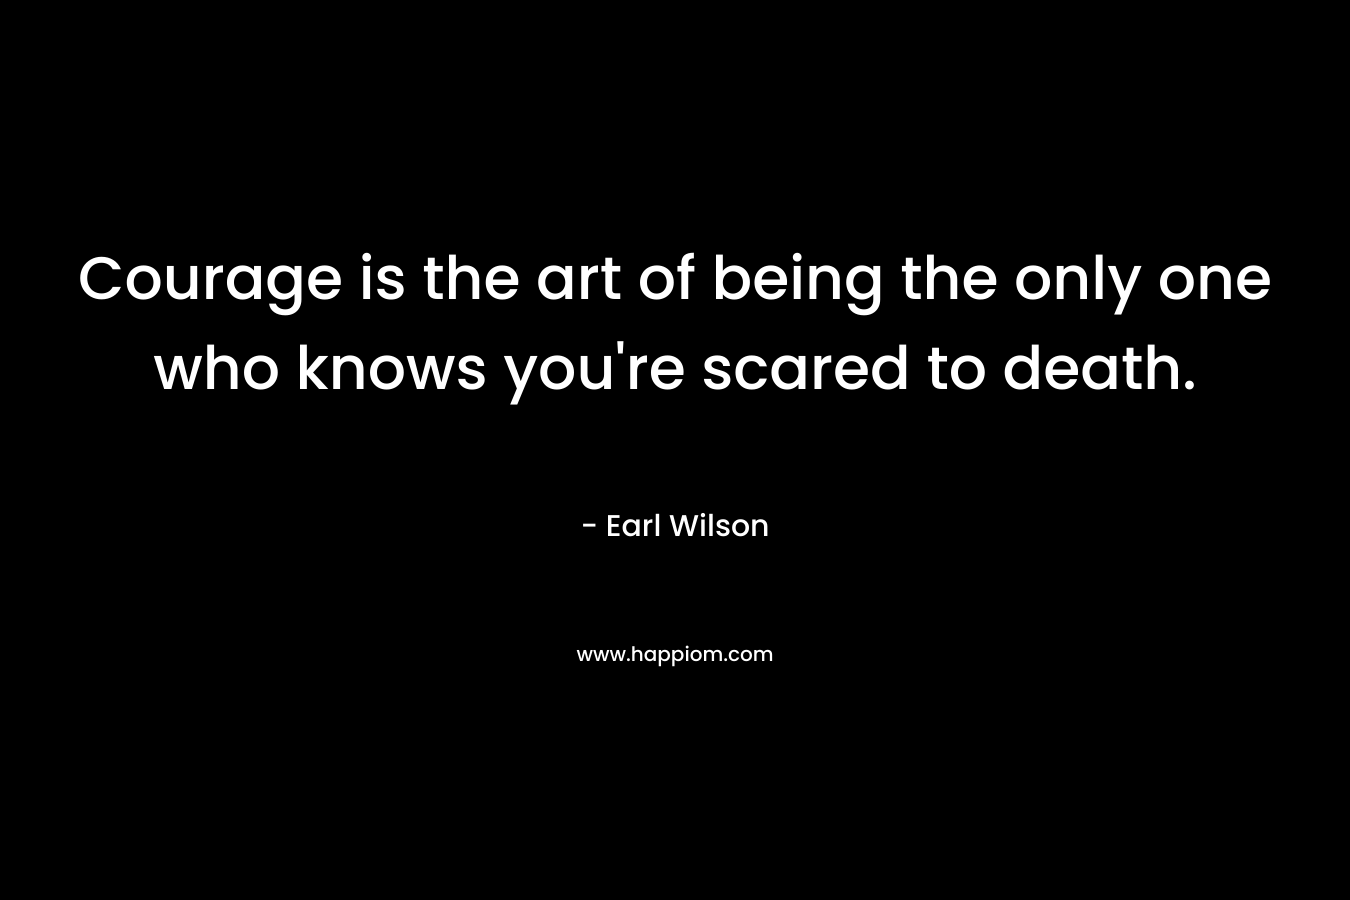 Courage is the art of being the only one who knows you're scared to death.